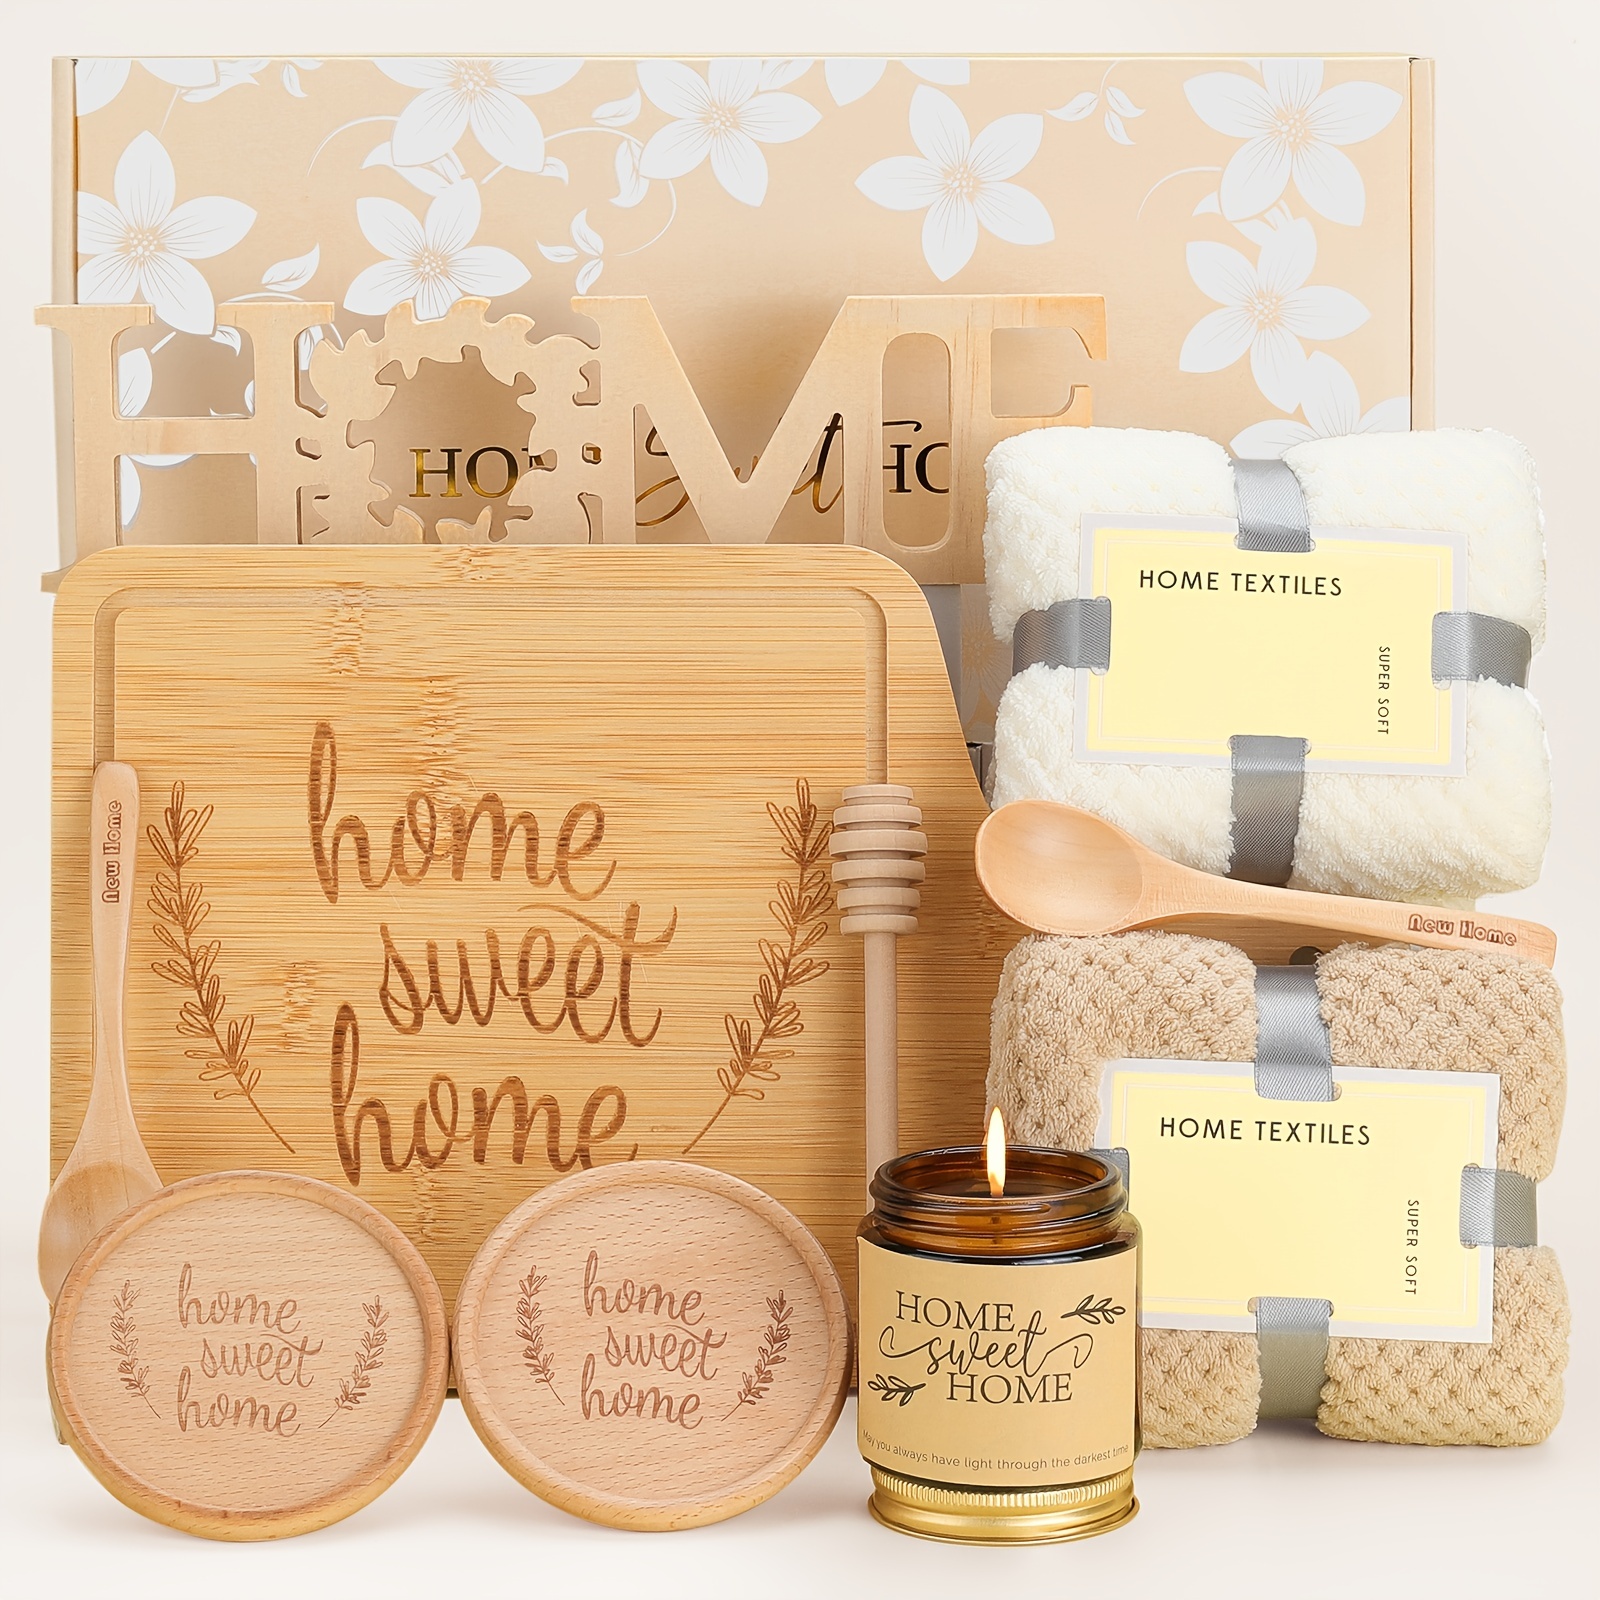 House Warming Gifts New Home - Housewarming Gifts for New House, Housewarming Gift Presents for Women, Housewarming Gifts for Women, Couple - New